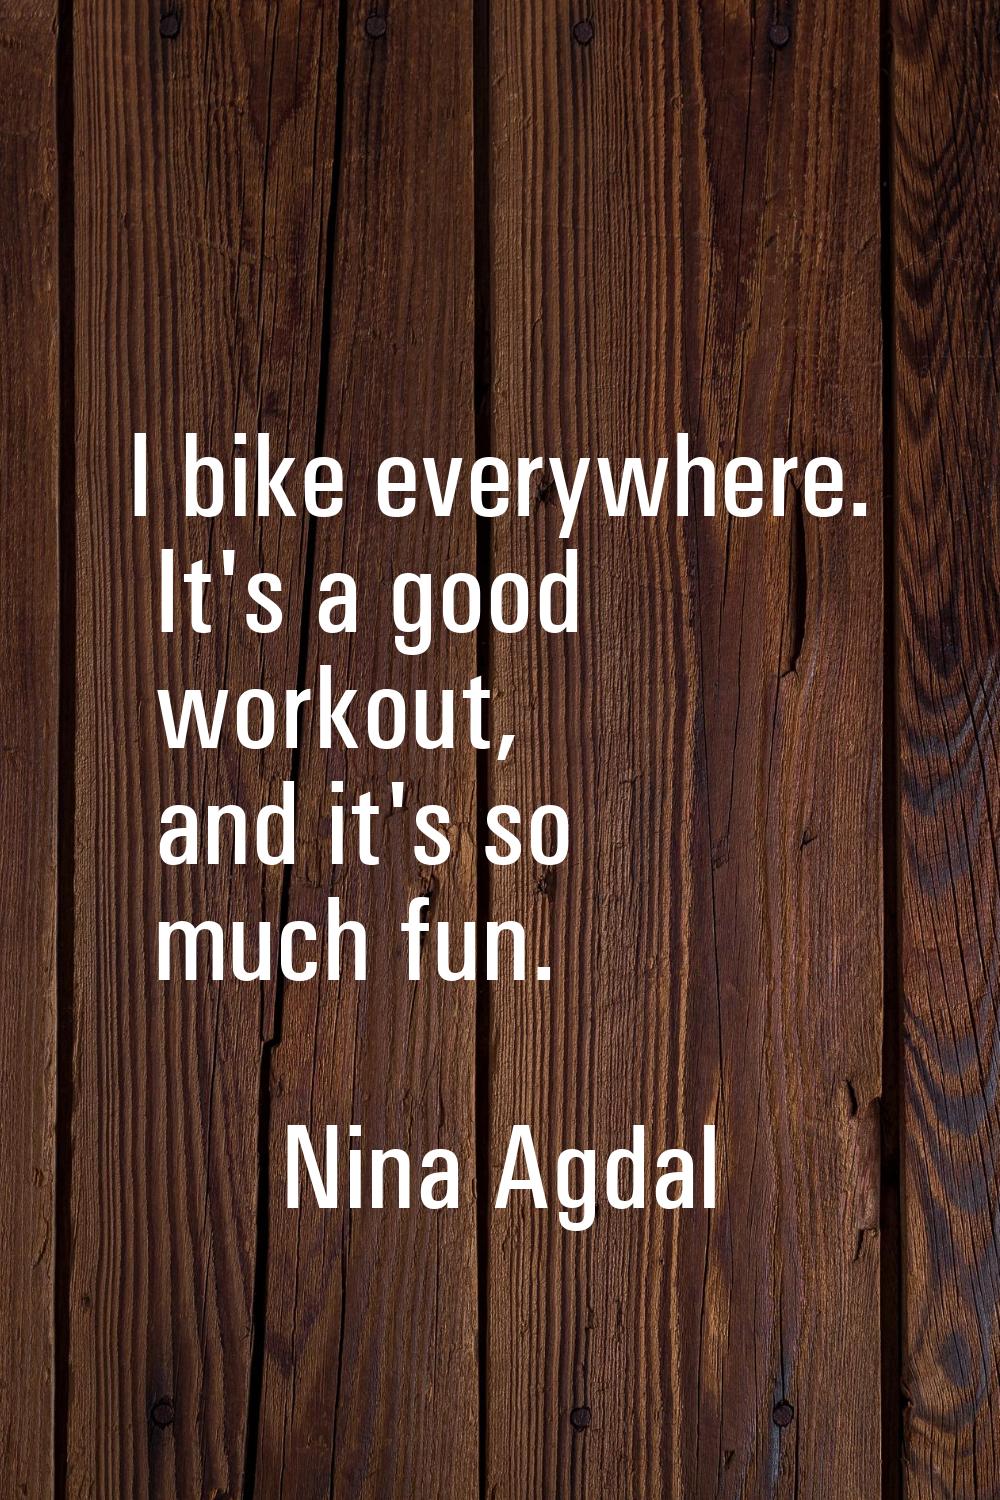 I bike everywhere. It's a good workout, and it's so much fun.